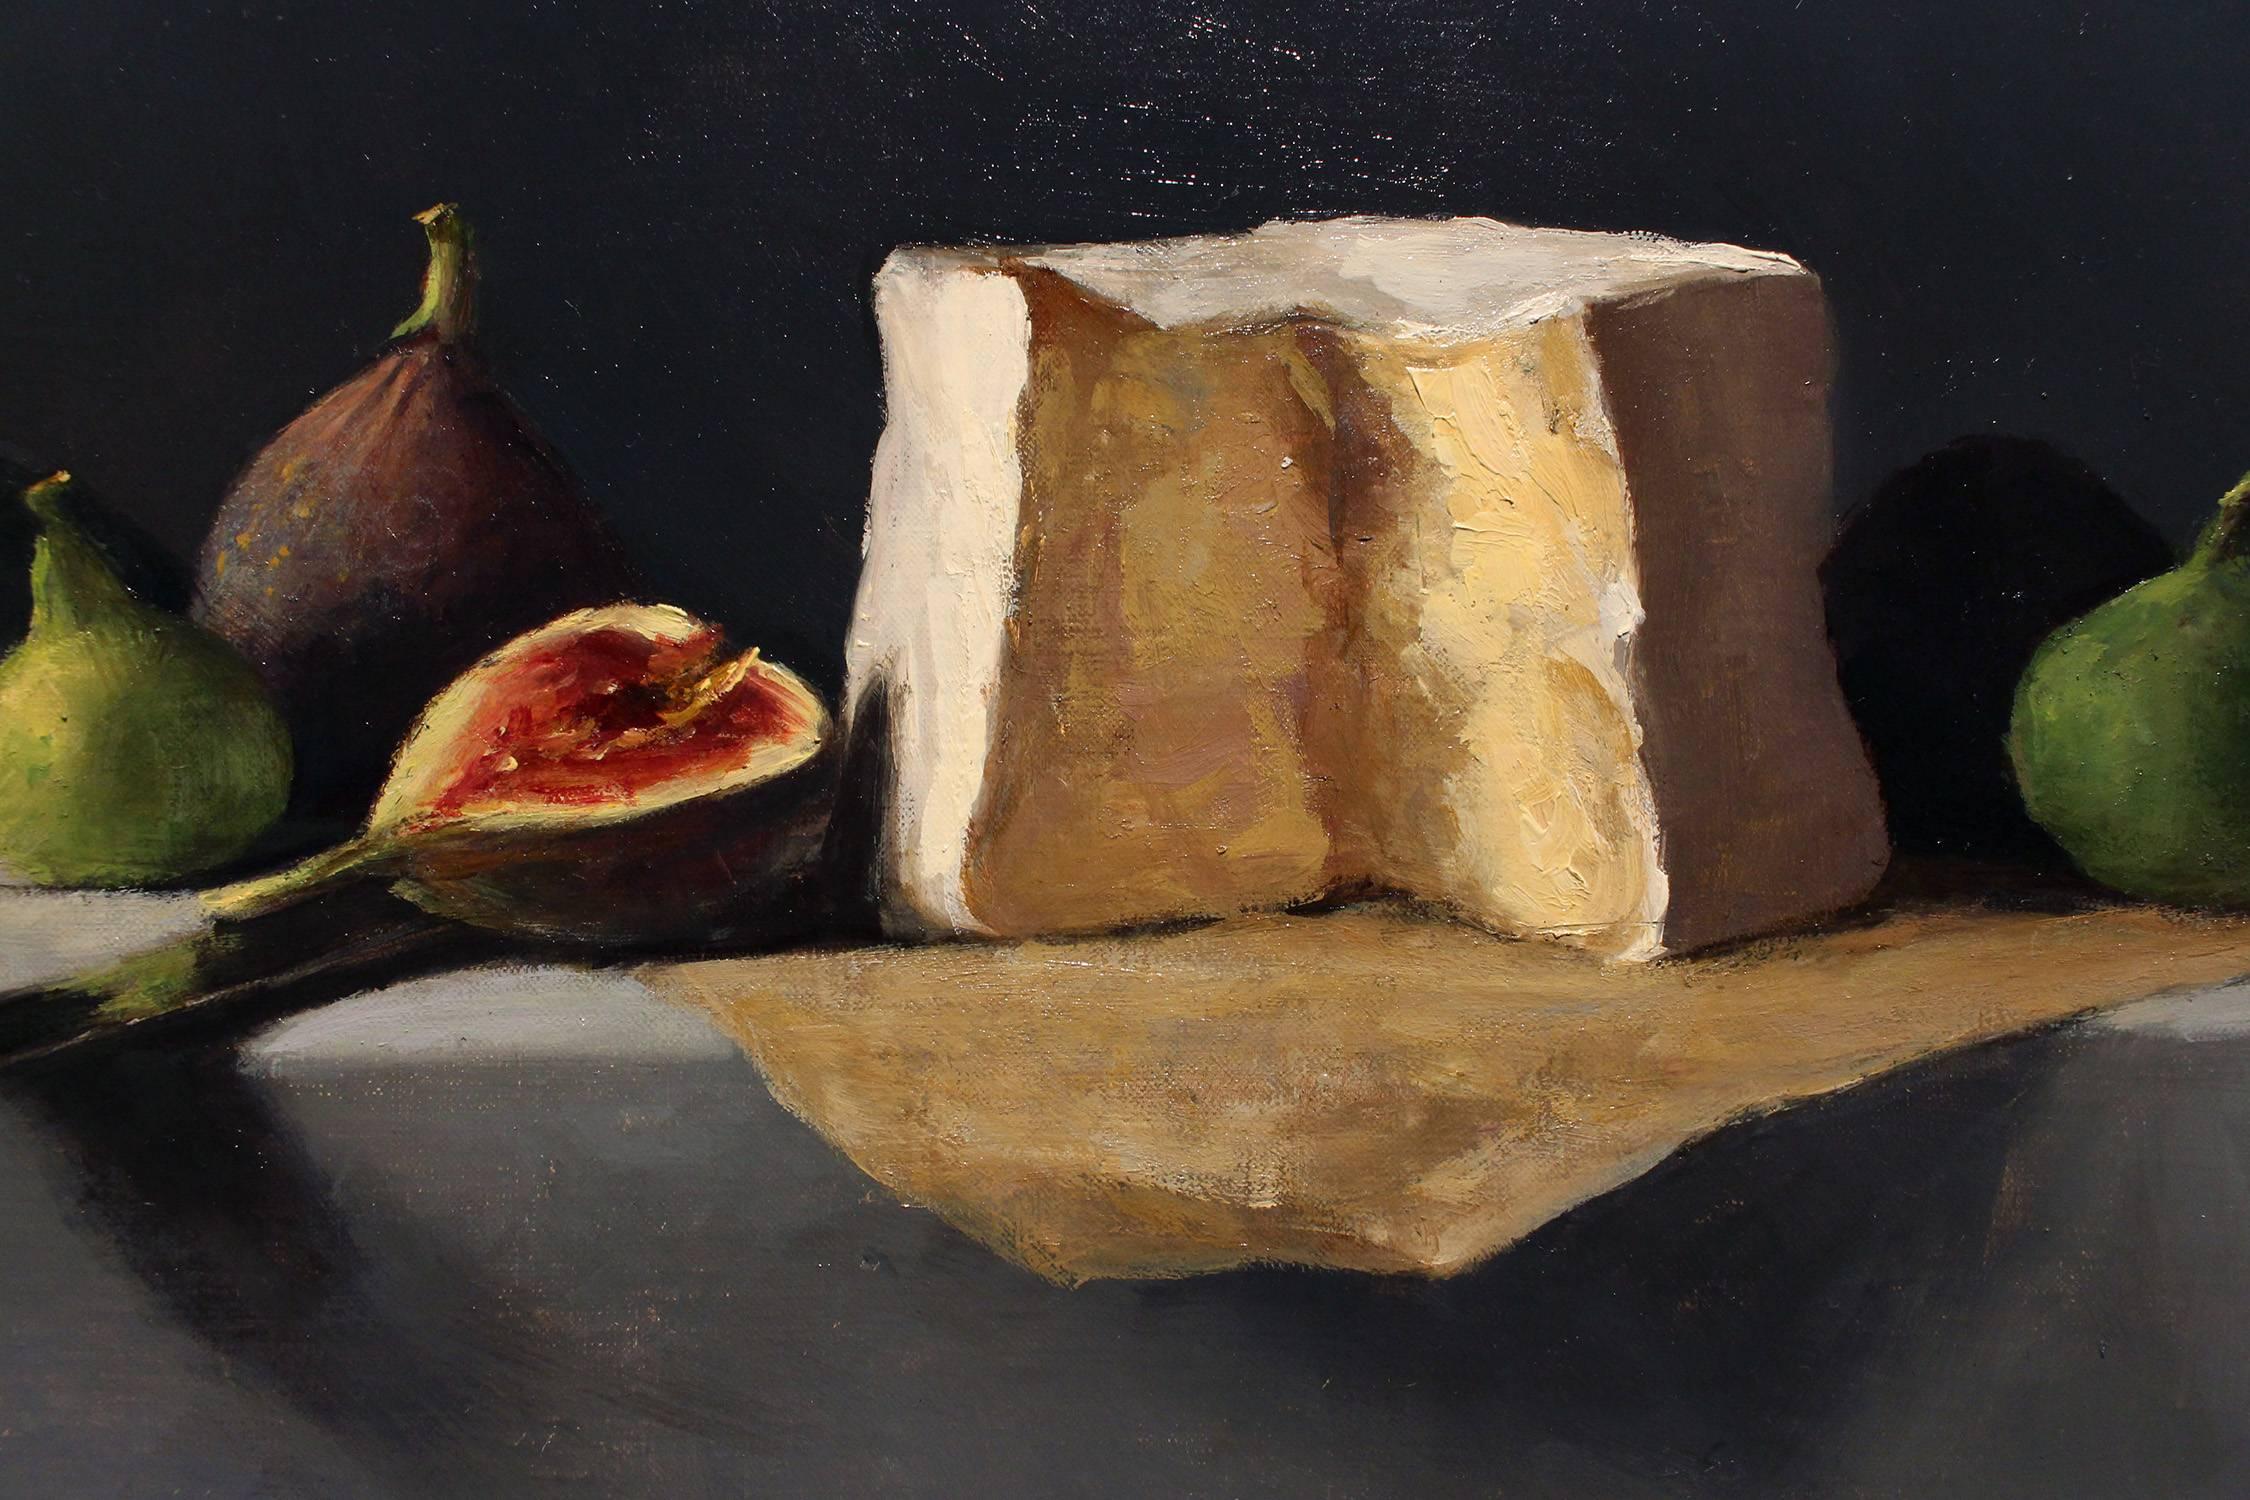 L’Explorateur and Figs - American Realist Painting by Sarah Lamb